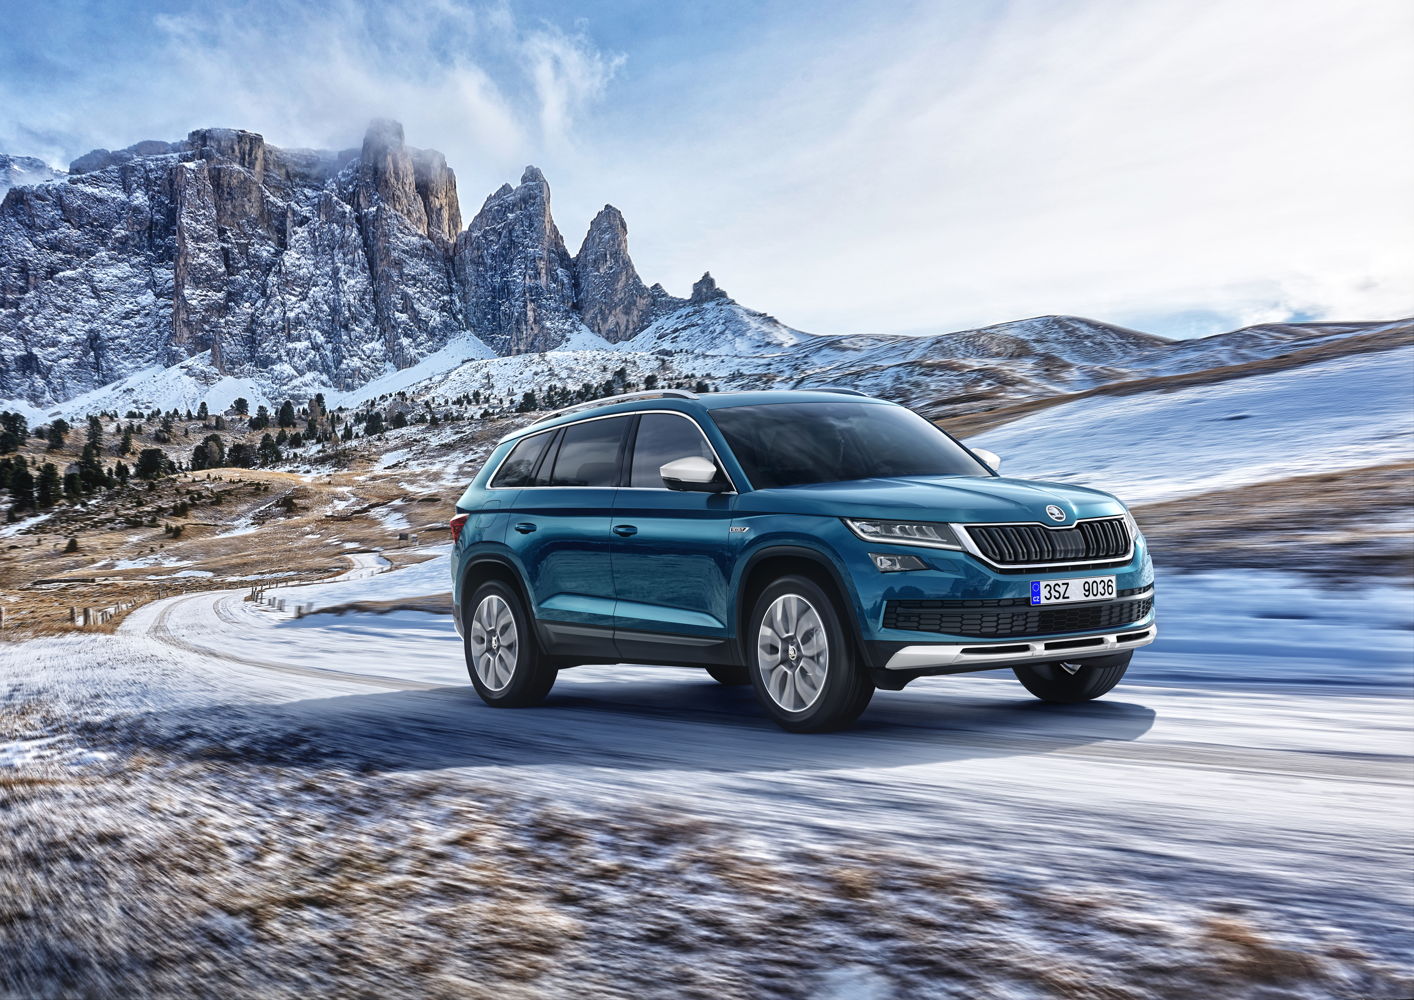 ŠKODA seamlessly continues last year’s record results. The start of the new large ŠKODA KODIAQ SUV (photo) promises further growth momentum for 2017.